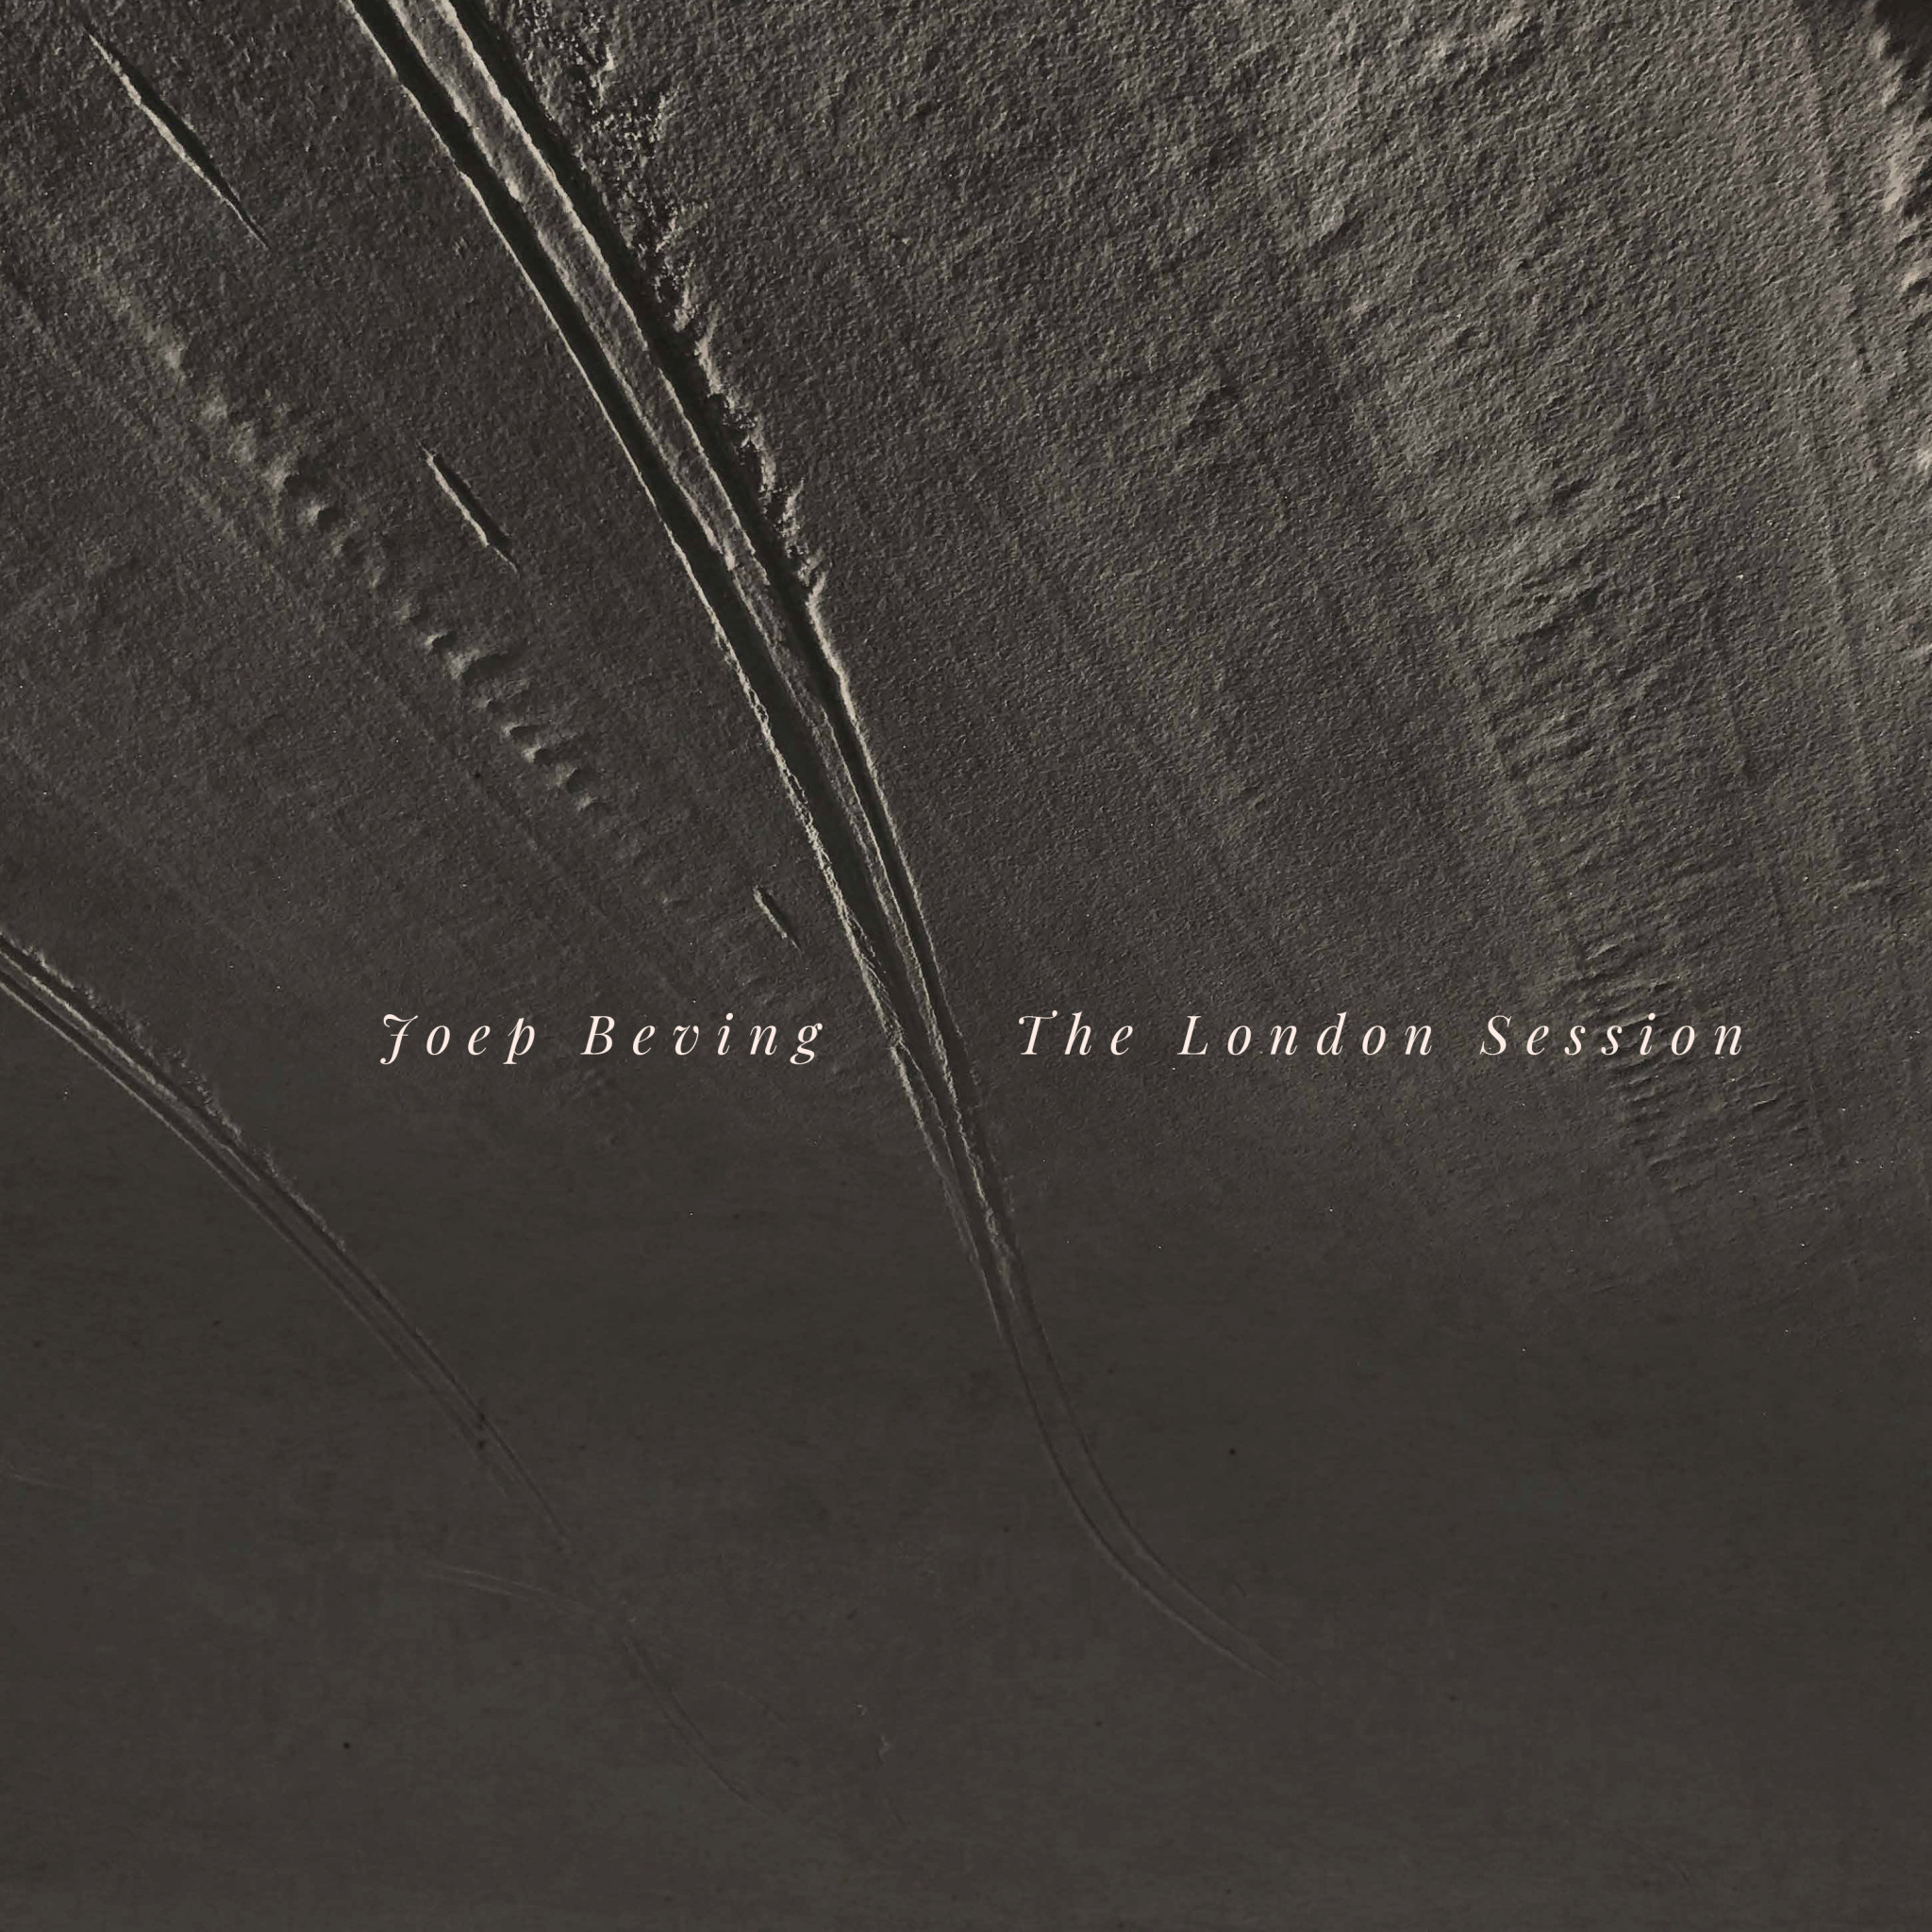 The London Session - Joep Beving